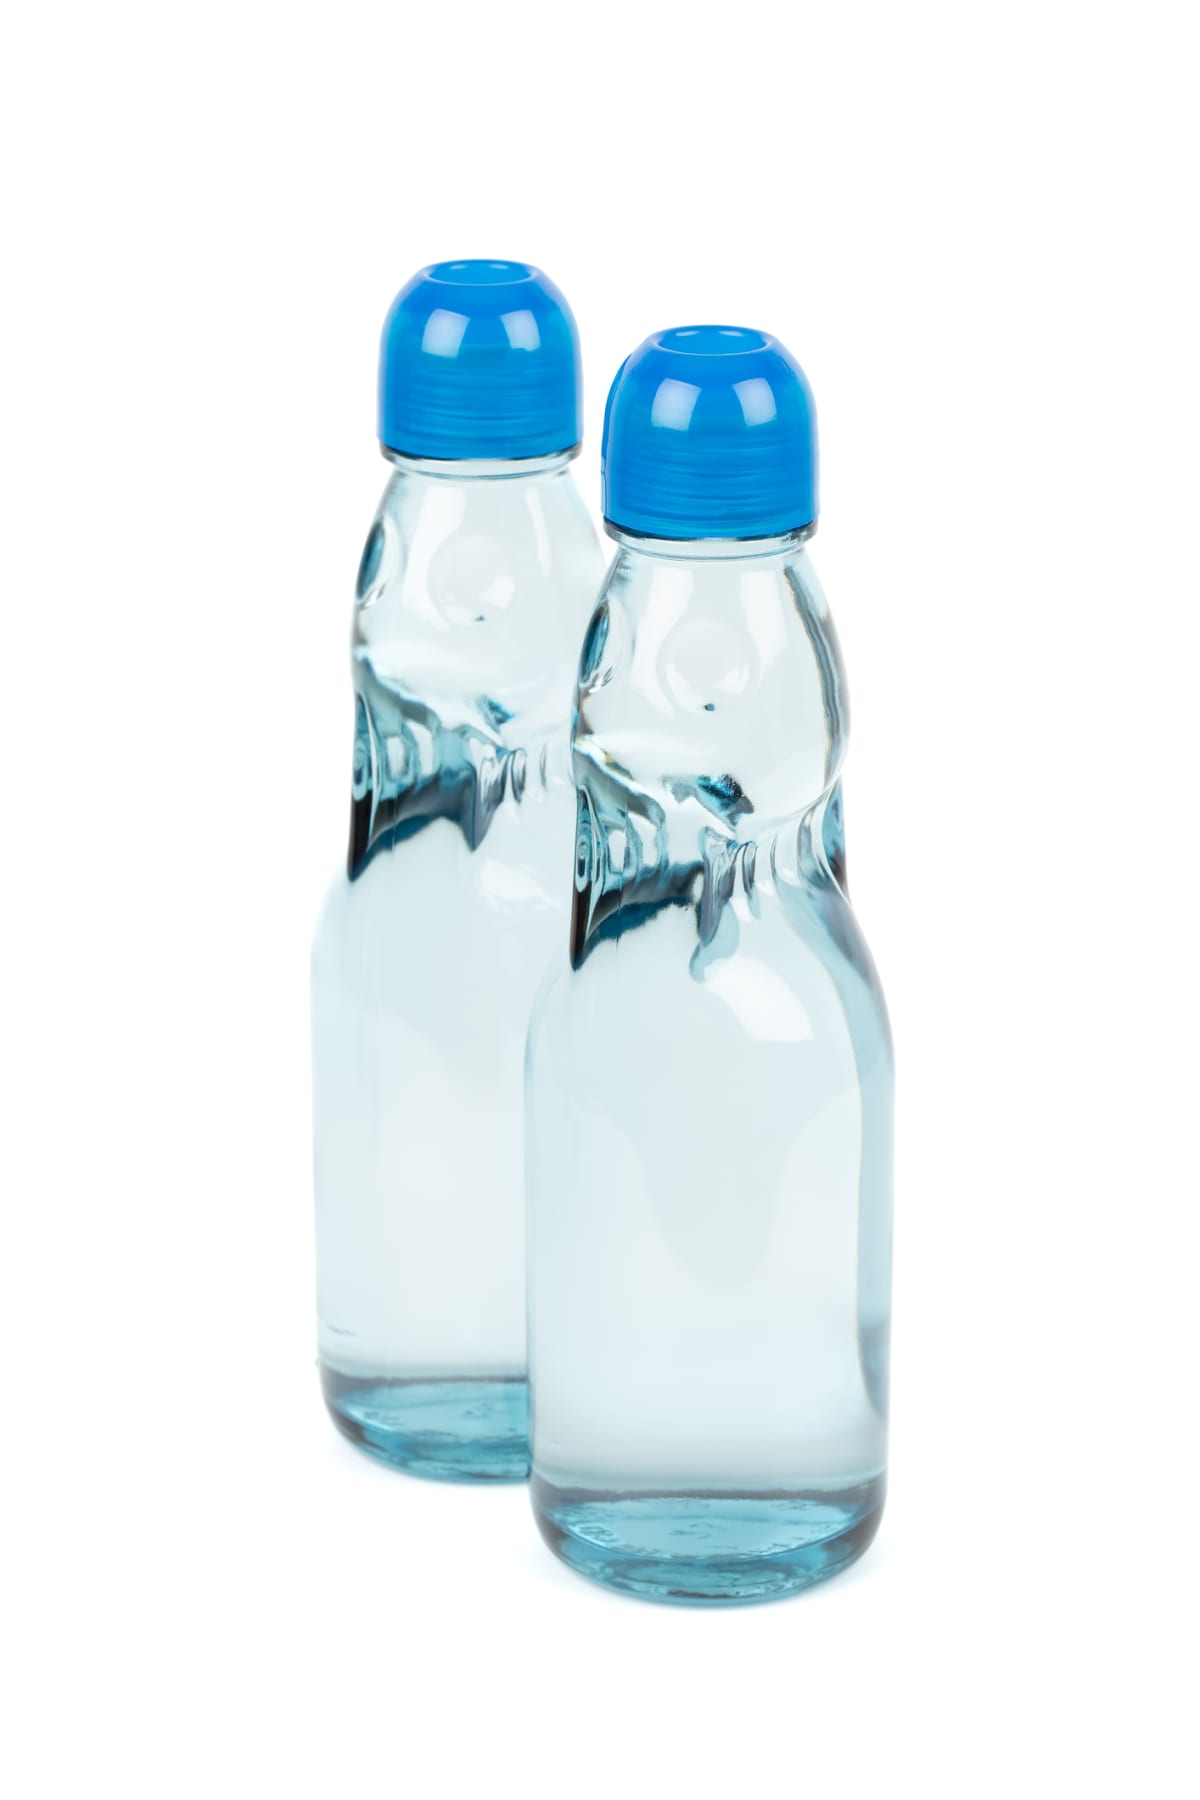 Two bottles of ramune soda against a white background